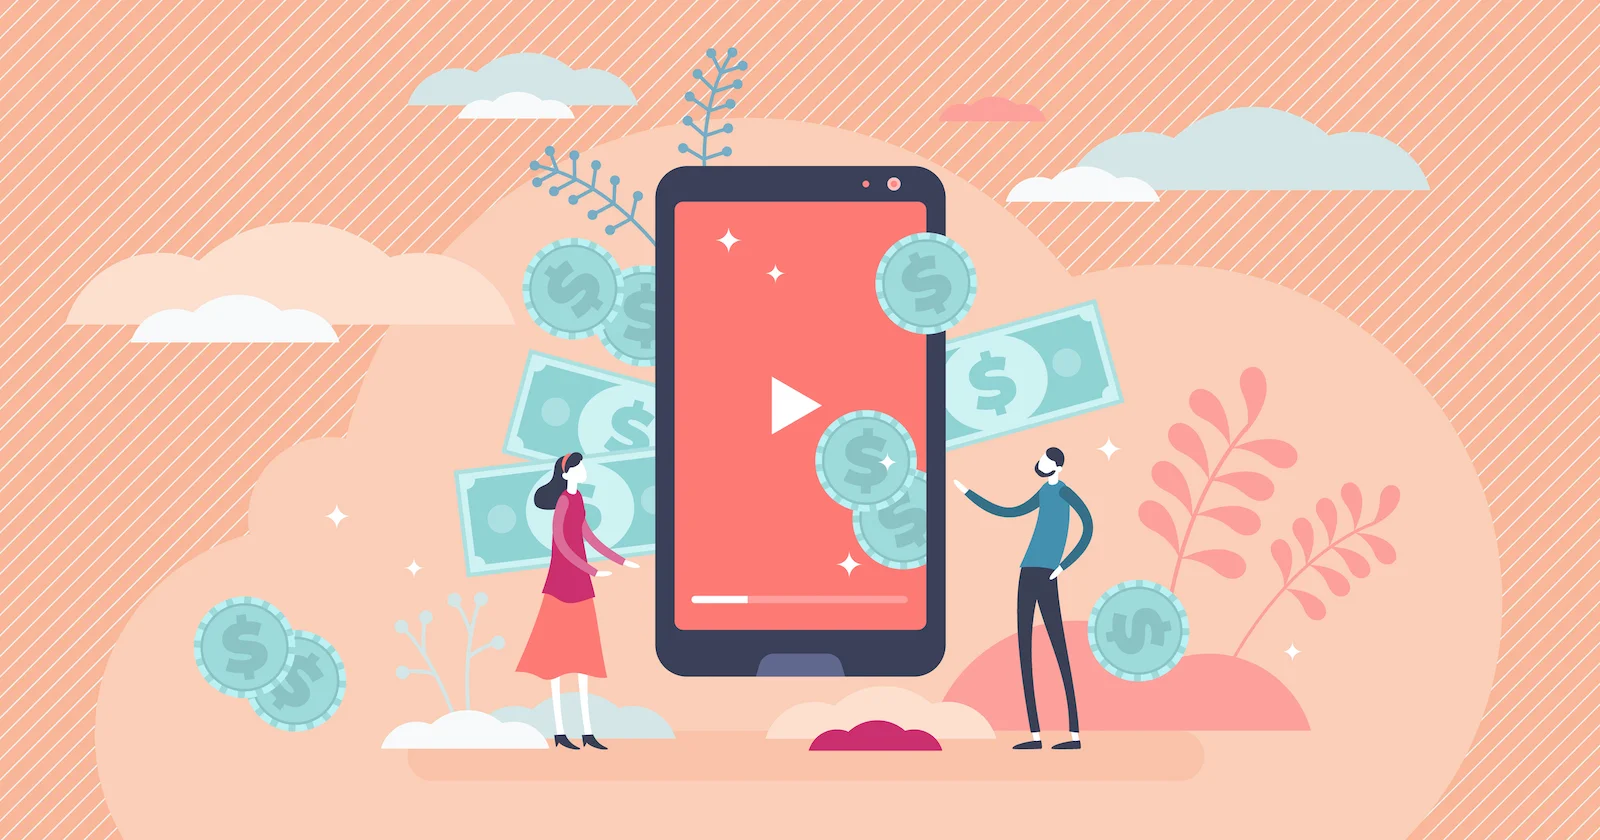 A whimsical illustration showing two characters interacting with a gigantic smartphone displaying a play button on the screen. Floating around the phone are symbols of currency, implying the generation of income through video ads. The background features pastel tones with abstract shapes, suggesting a digital, monetized ecosystem